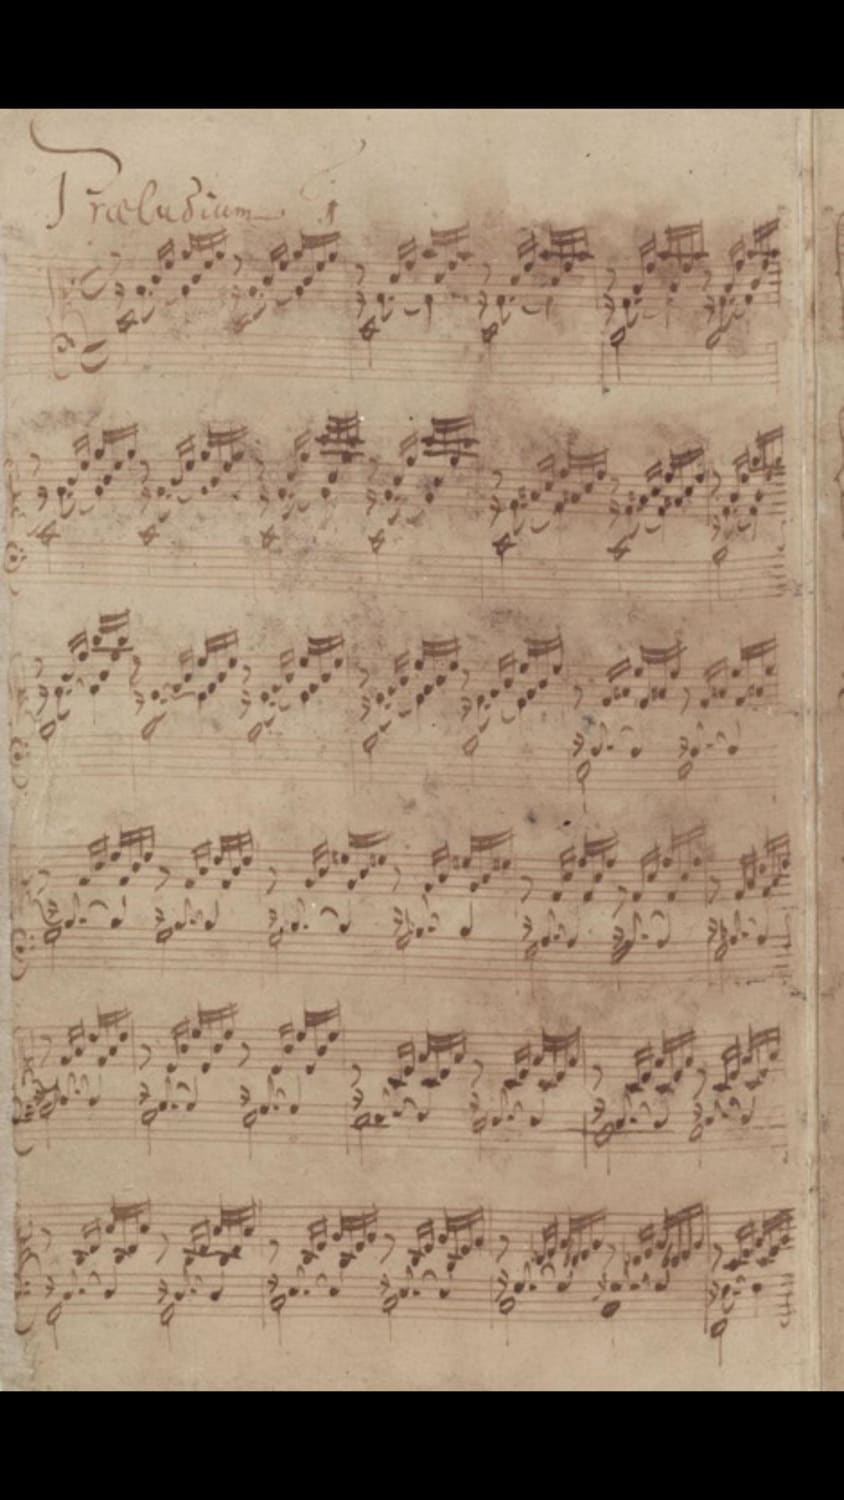 Bach’s handwriting is a form of art in itself. It’s no surprise that from someone who’s music is so intricate, and almost like a science of aesthetics and psychology, that the physical representation of it would rival the sound.